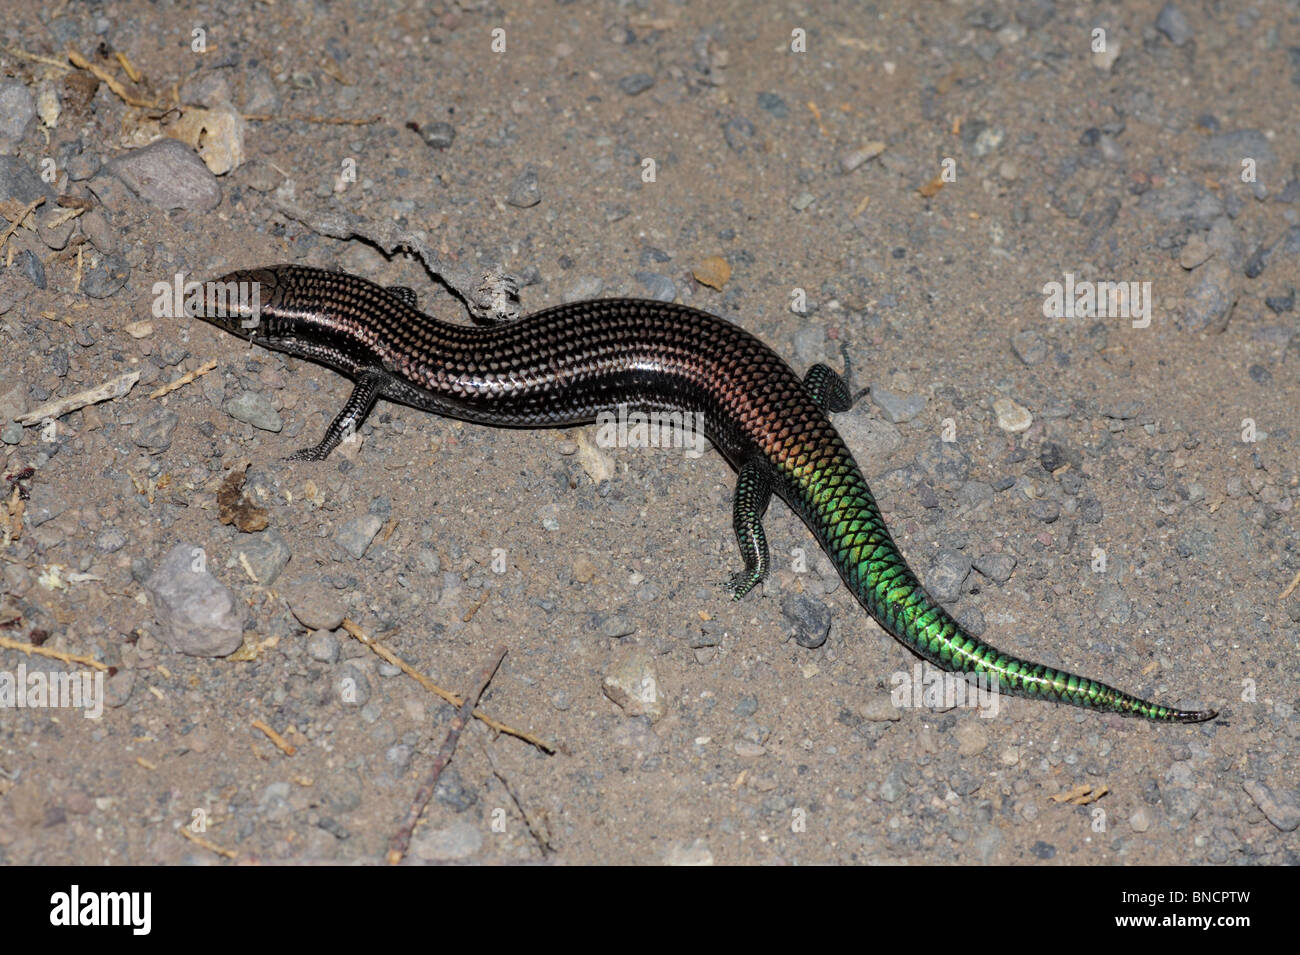 Gran Canaria Skink - Chalcides sexlineatus Stock Photo